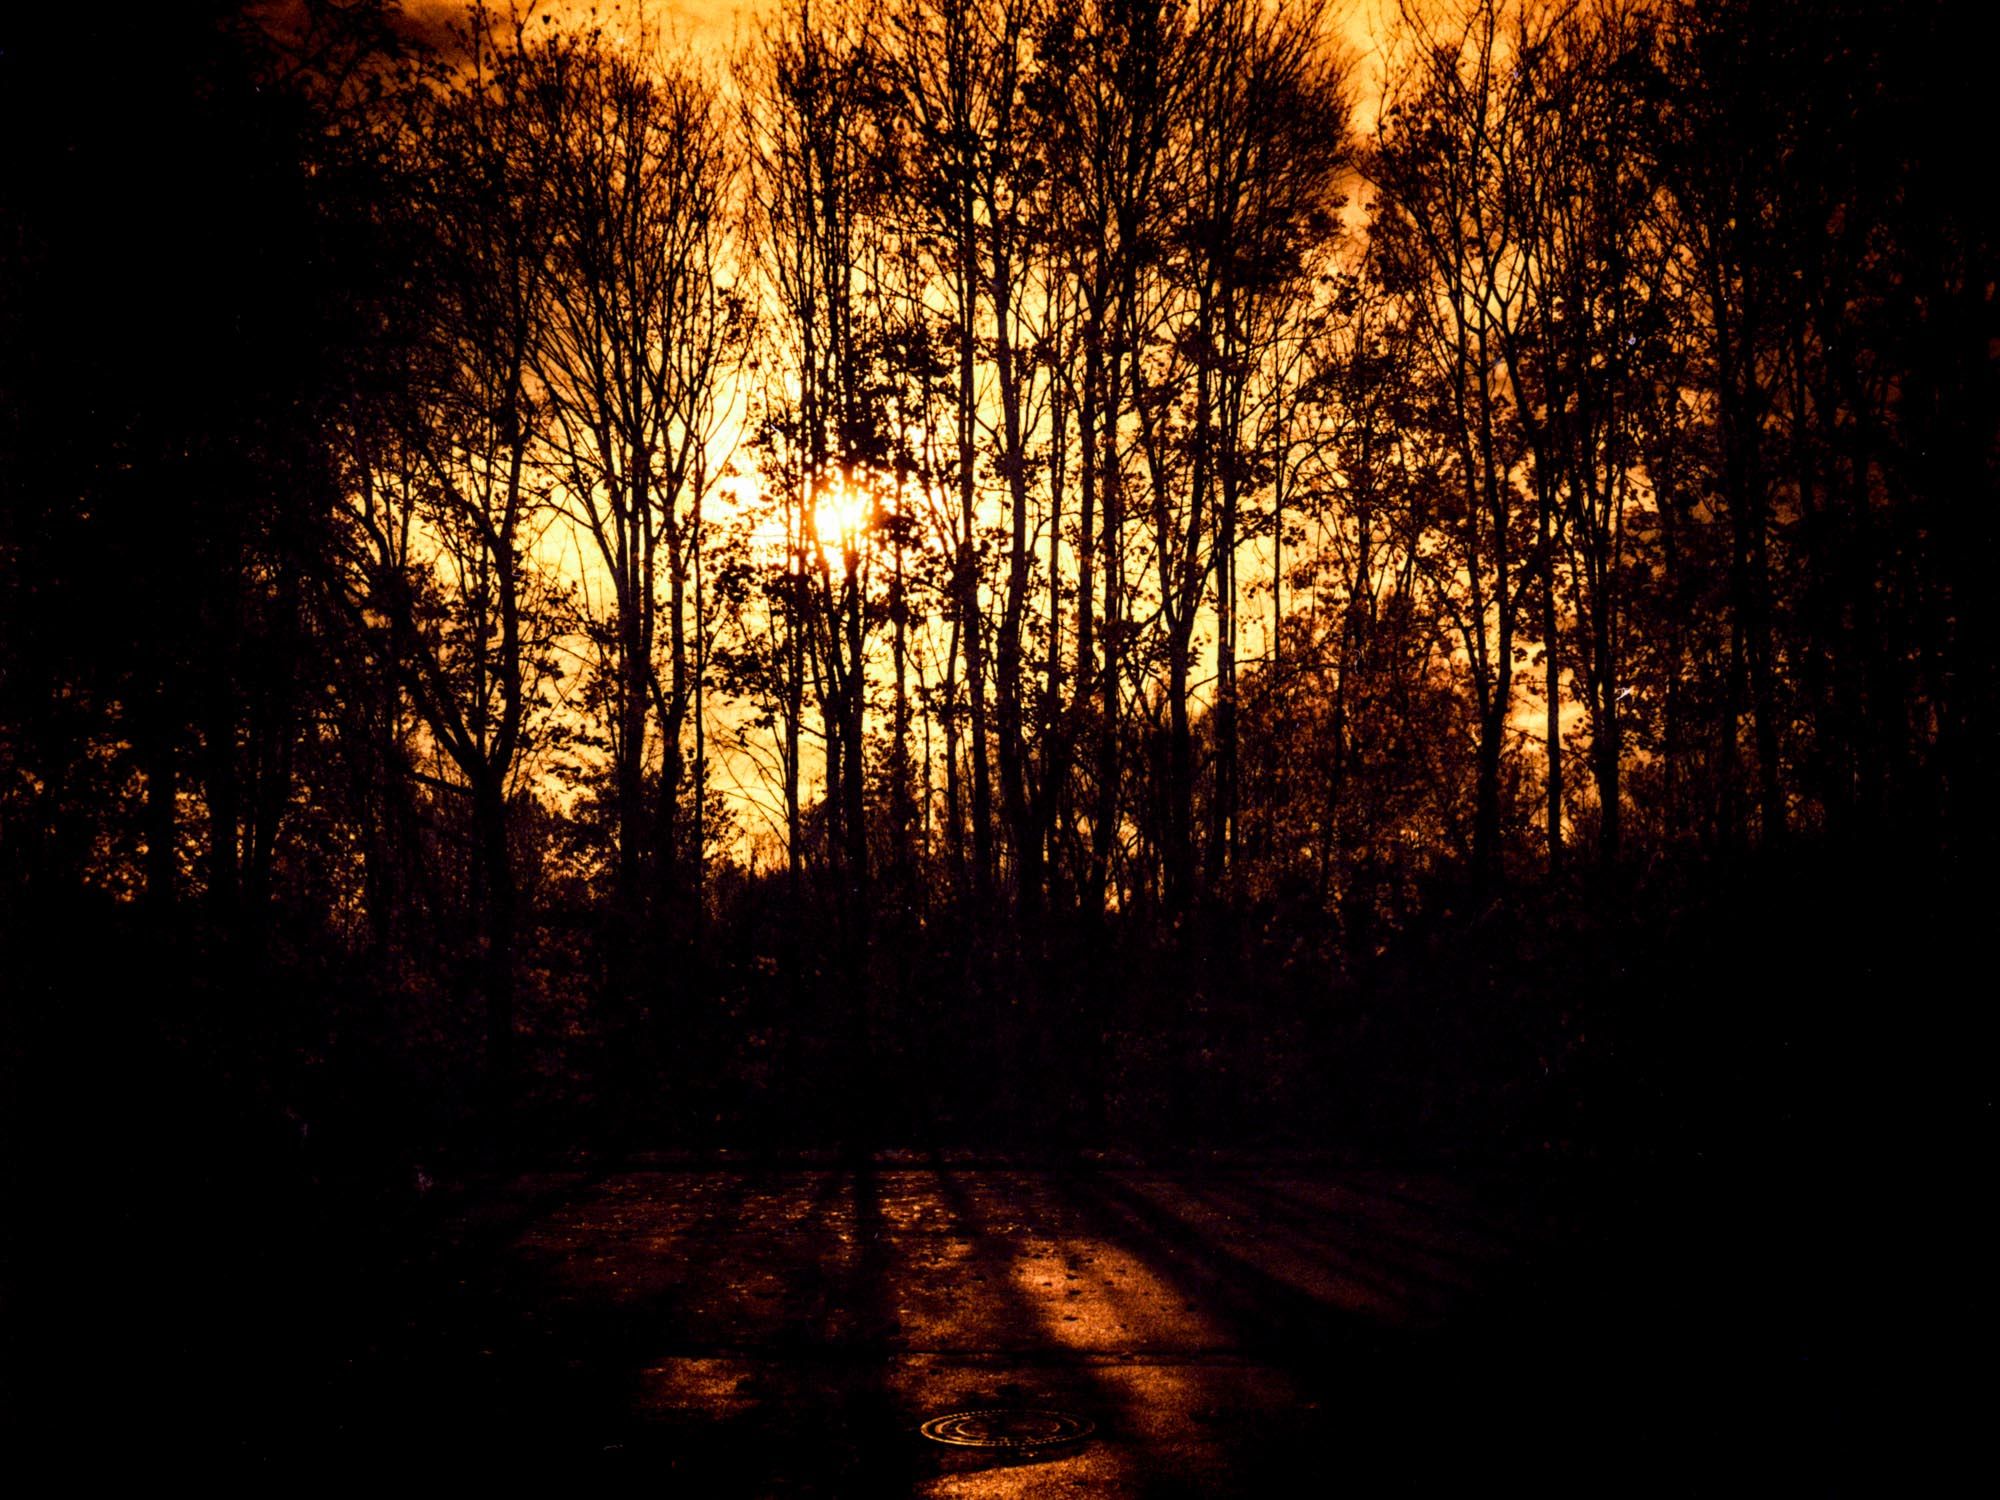 Redscale photography - Tree silhouette